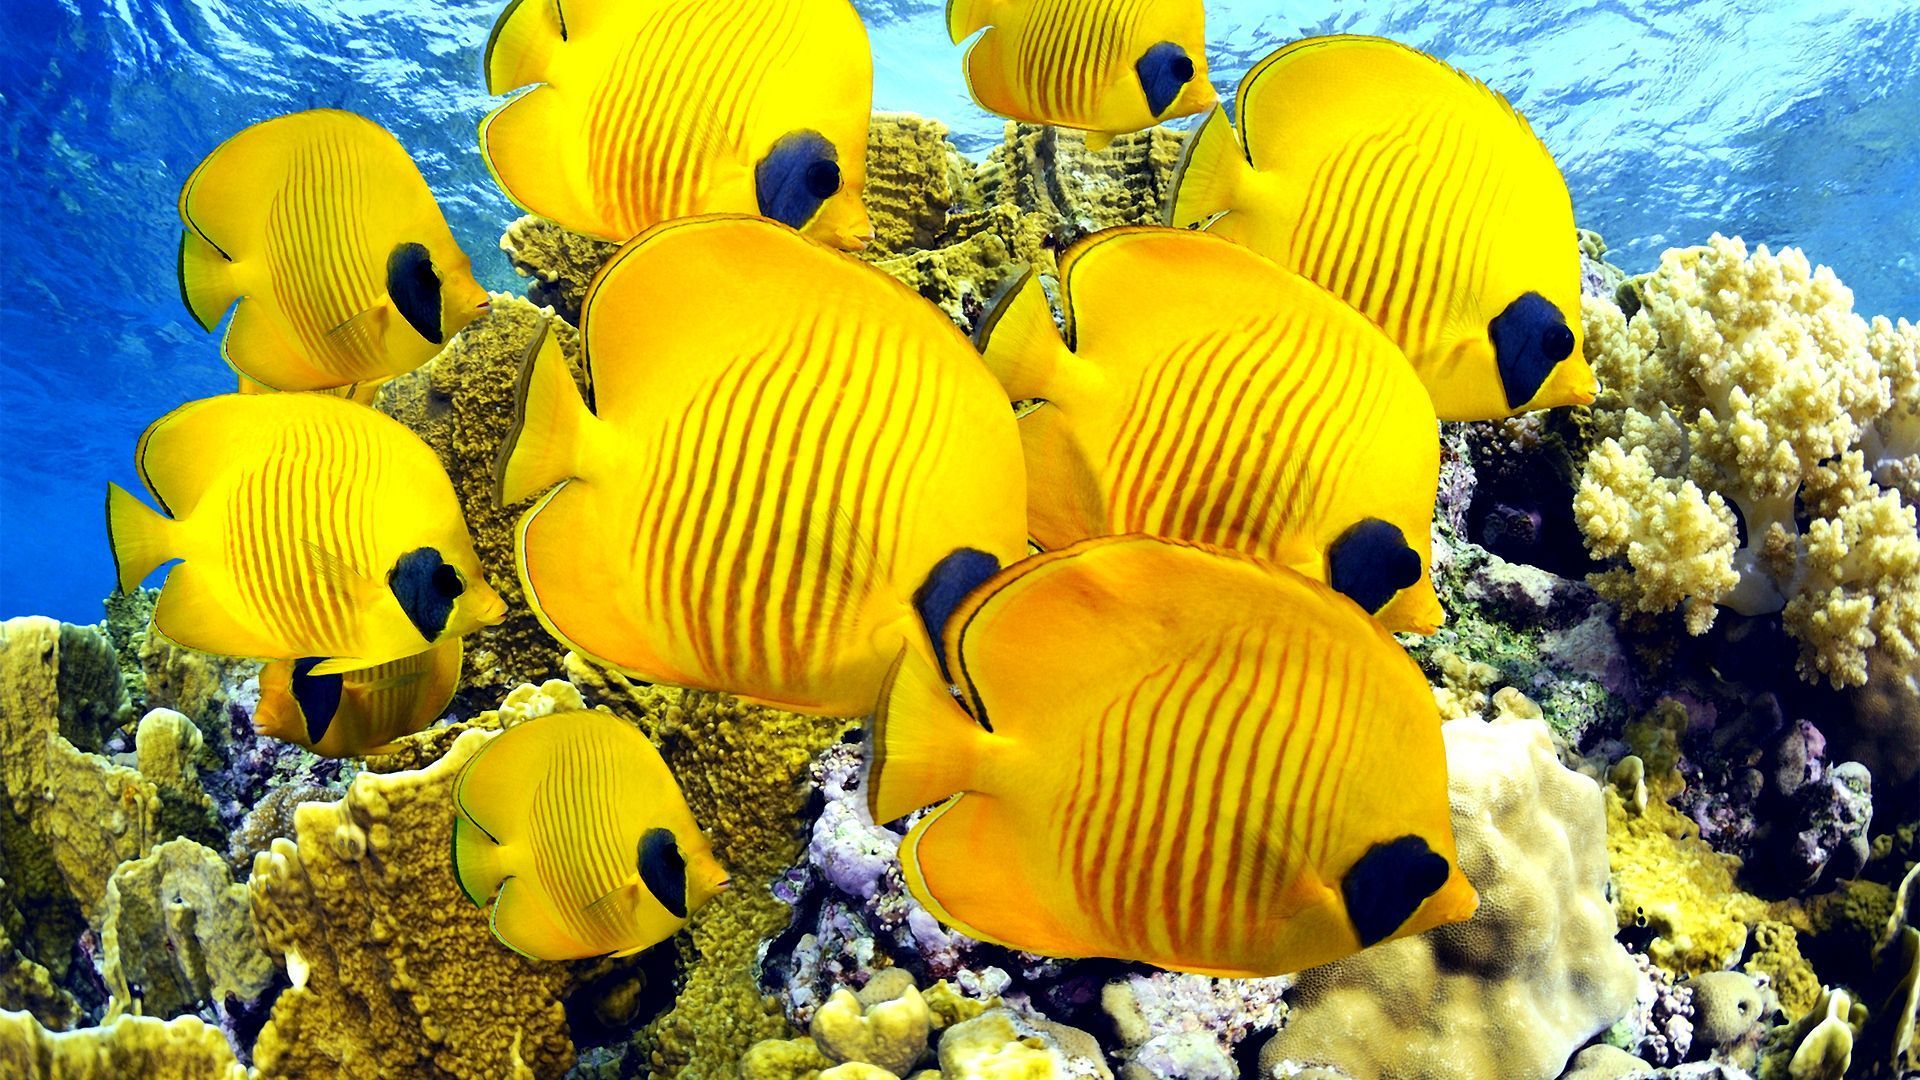 Fish Wallpapers | Best Wallpapers